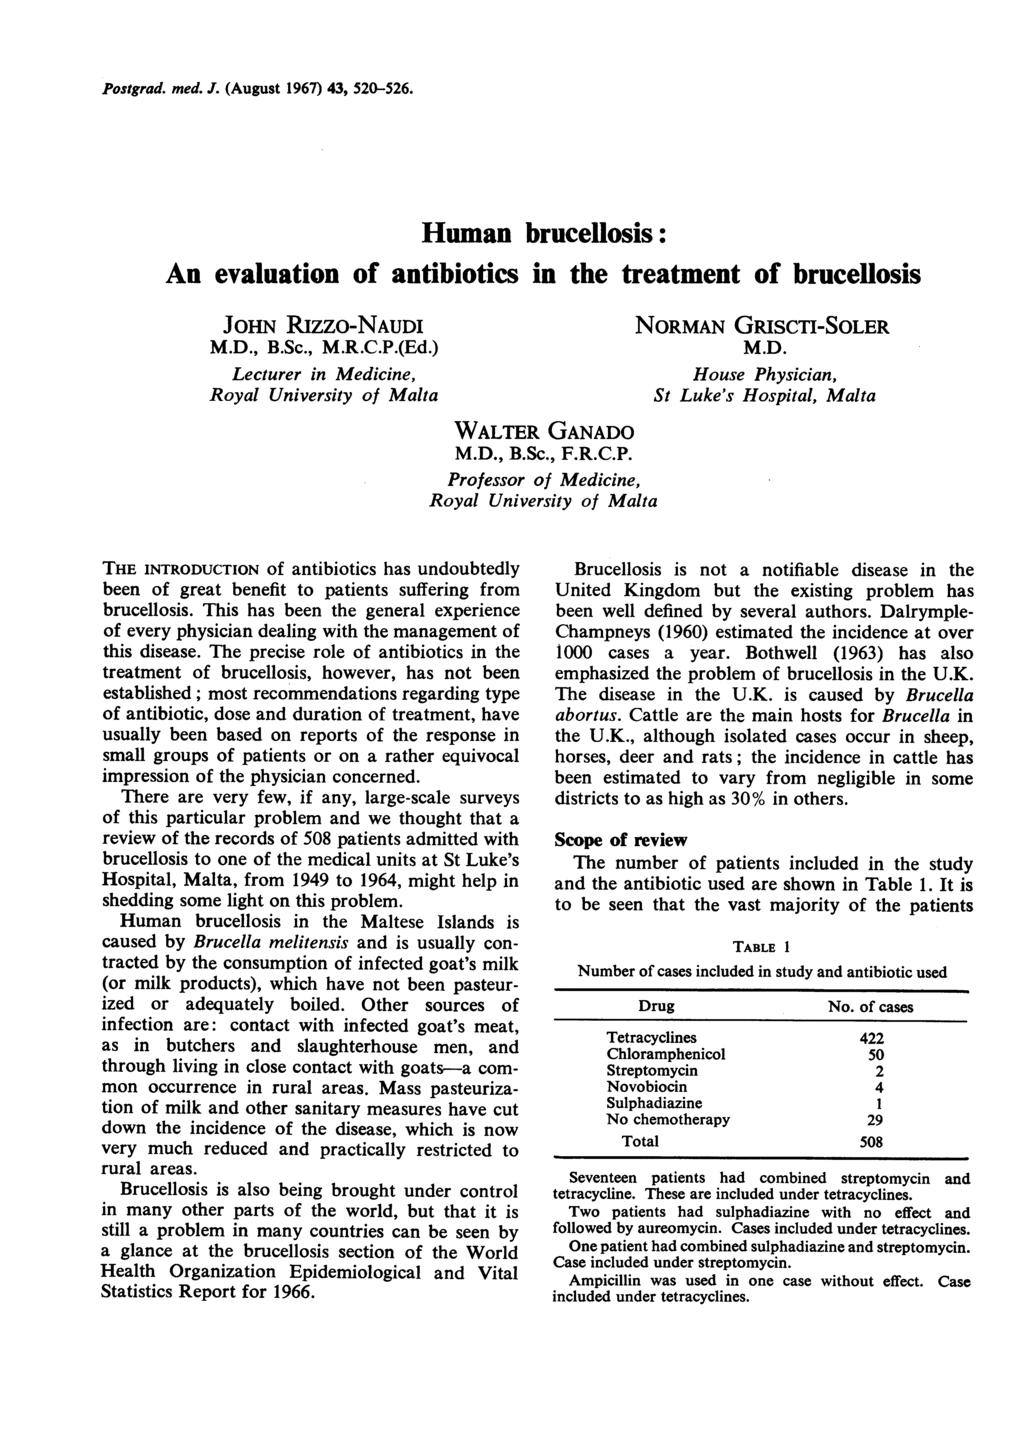 Postgrad. med. J. (August 1967) 43, 520-526. Human brucellosis: An evaluation of antibiotics in the treatment of brucellosis JoHN RIZZO-NAUDI M.D., B.Sc., M.R.C.P.(Ed.